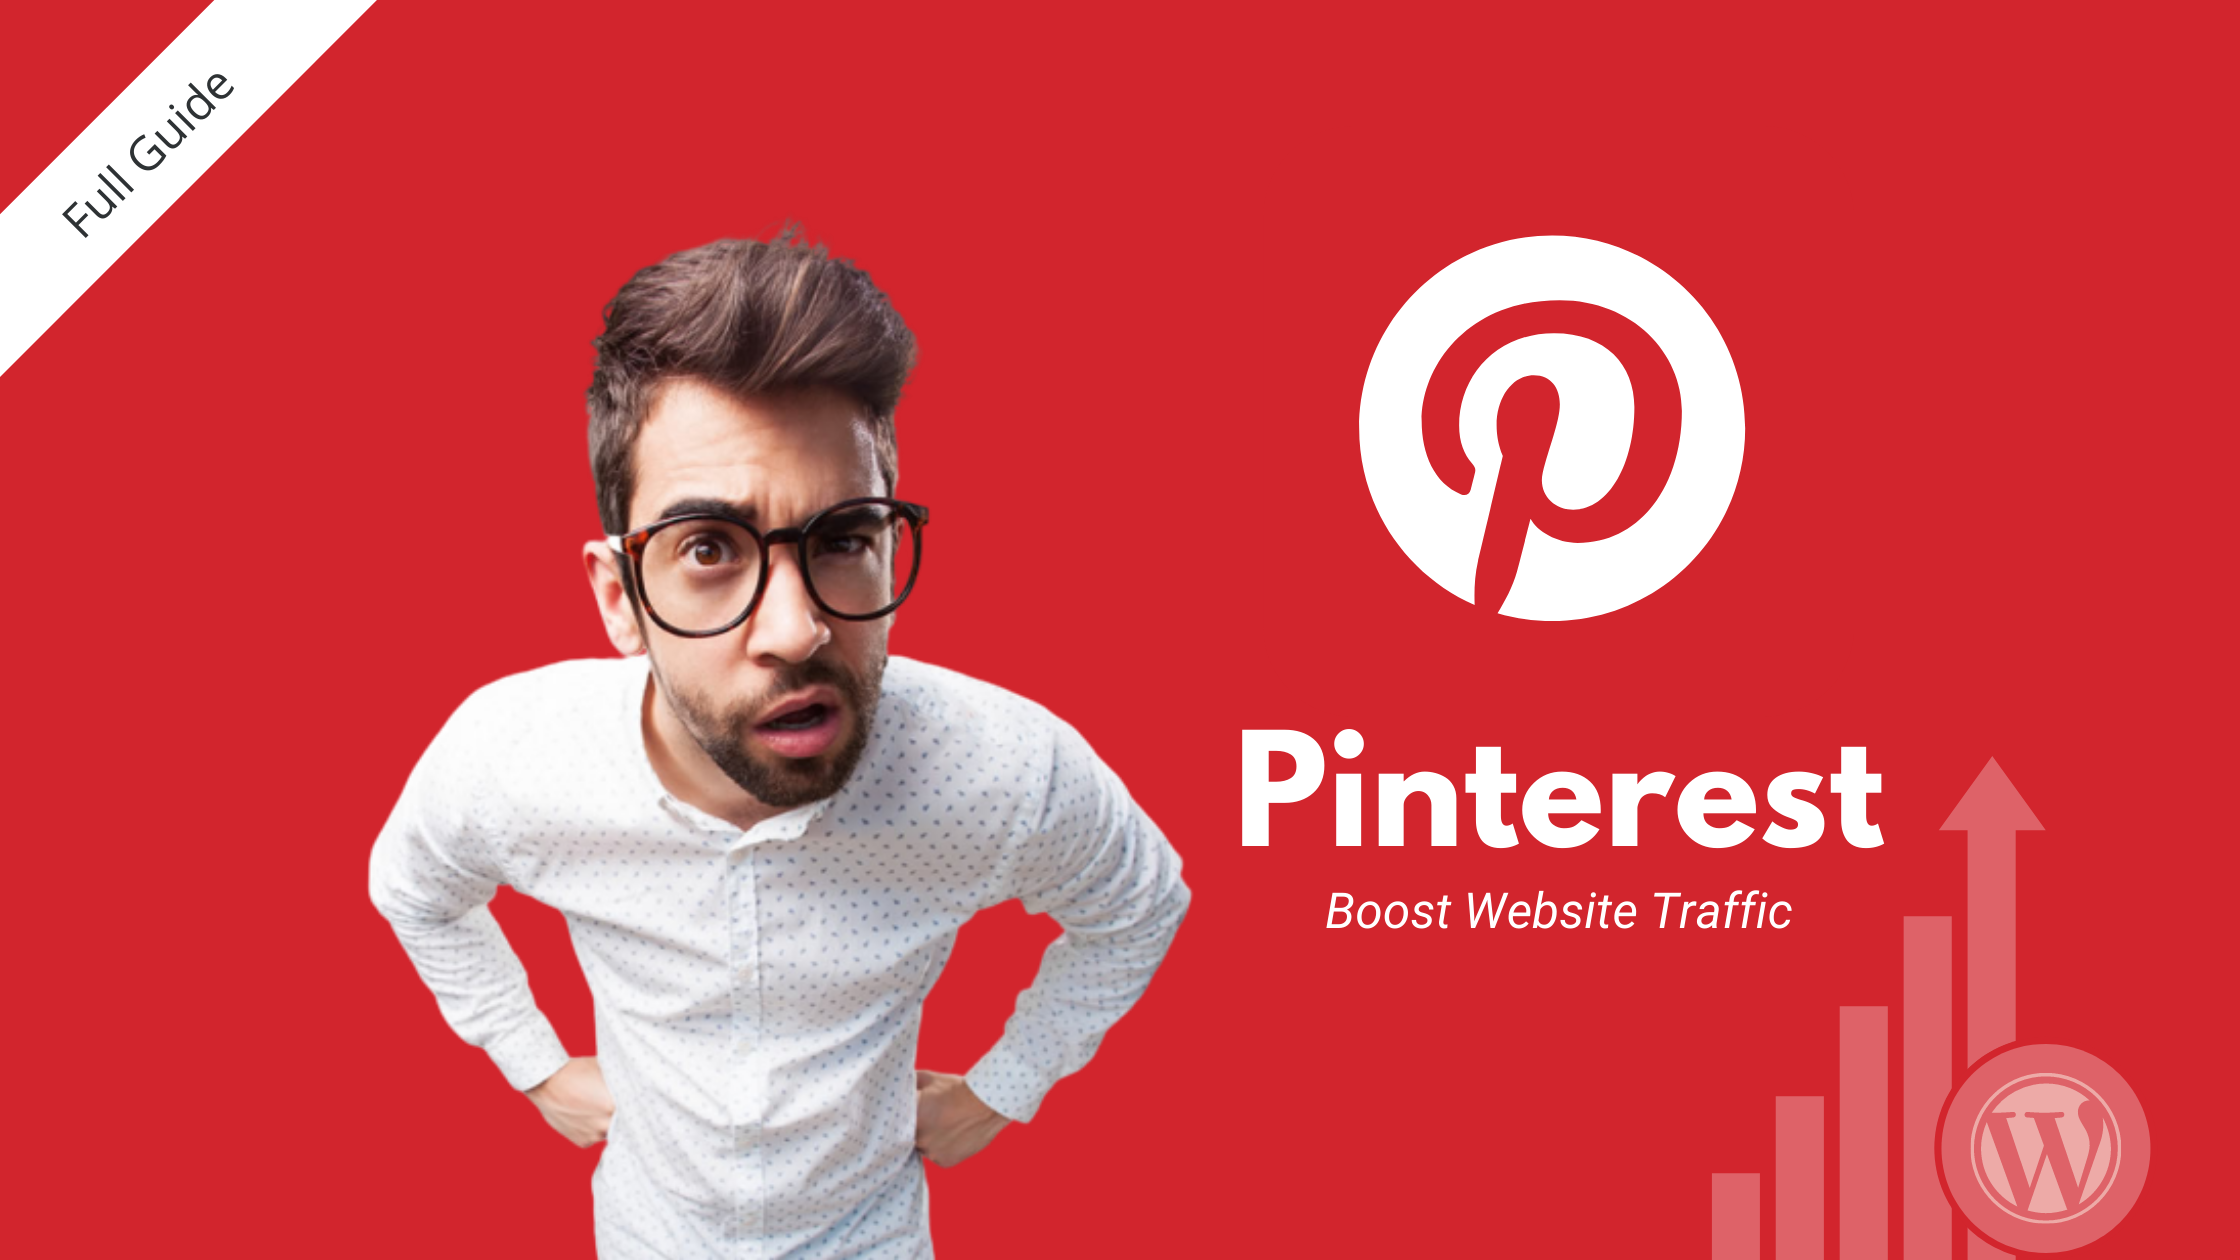 How to Use Pinterest to Boost Website Traffic